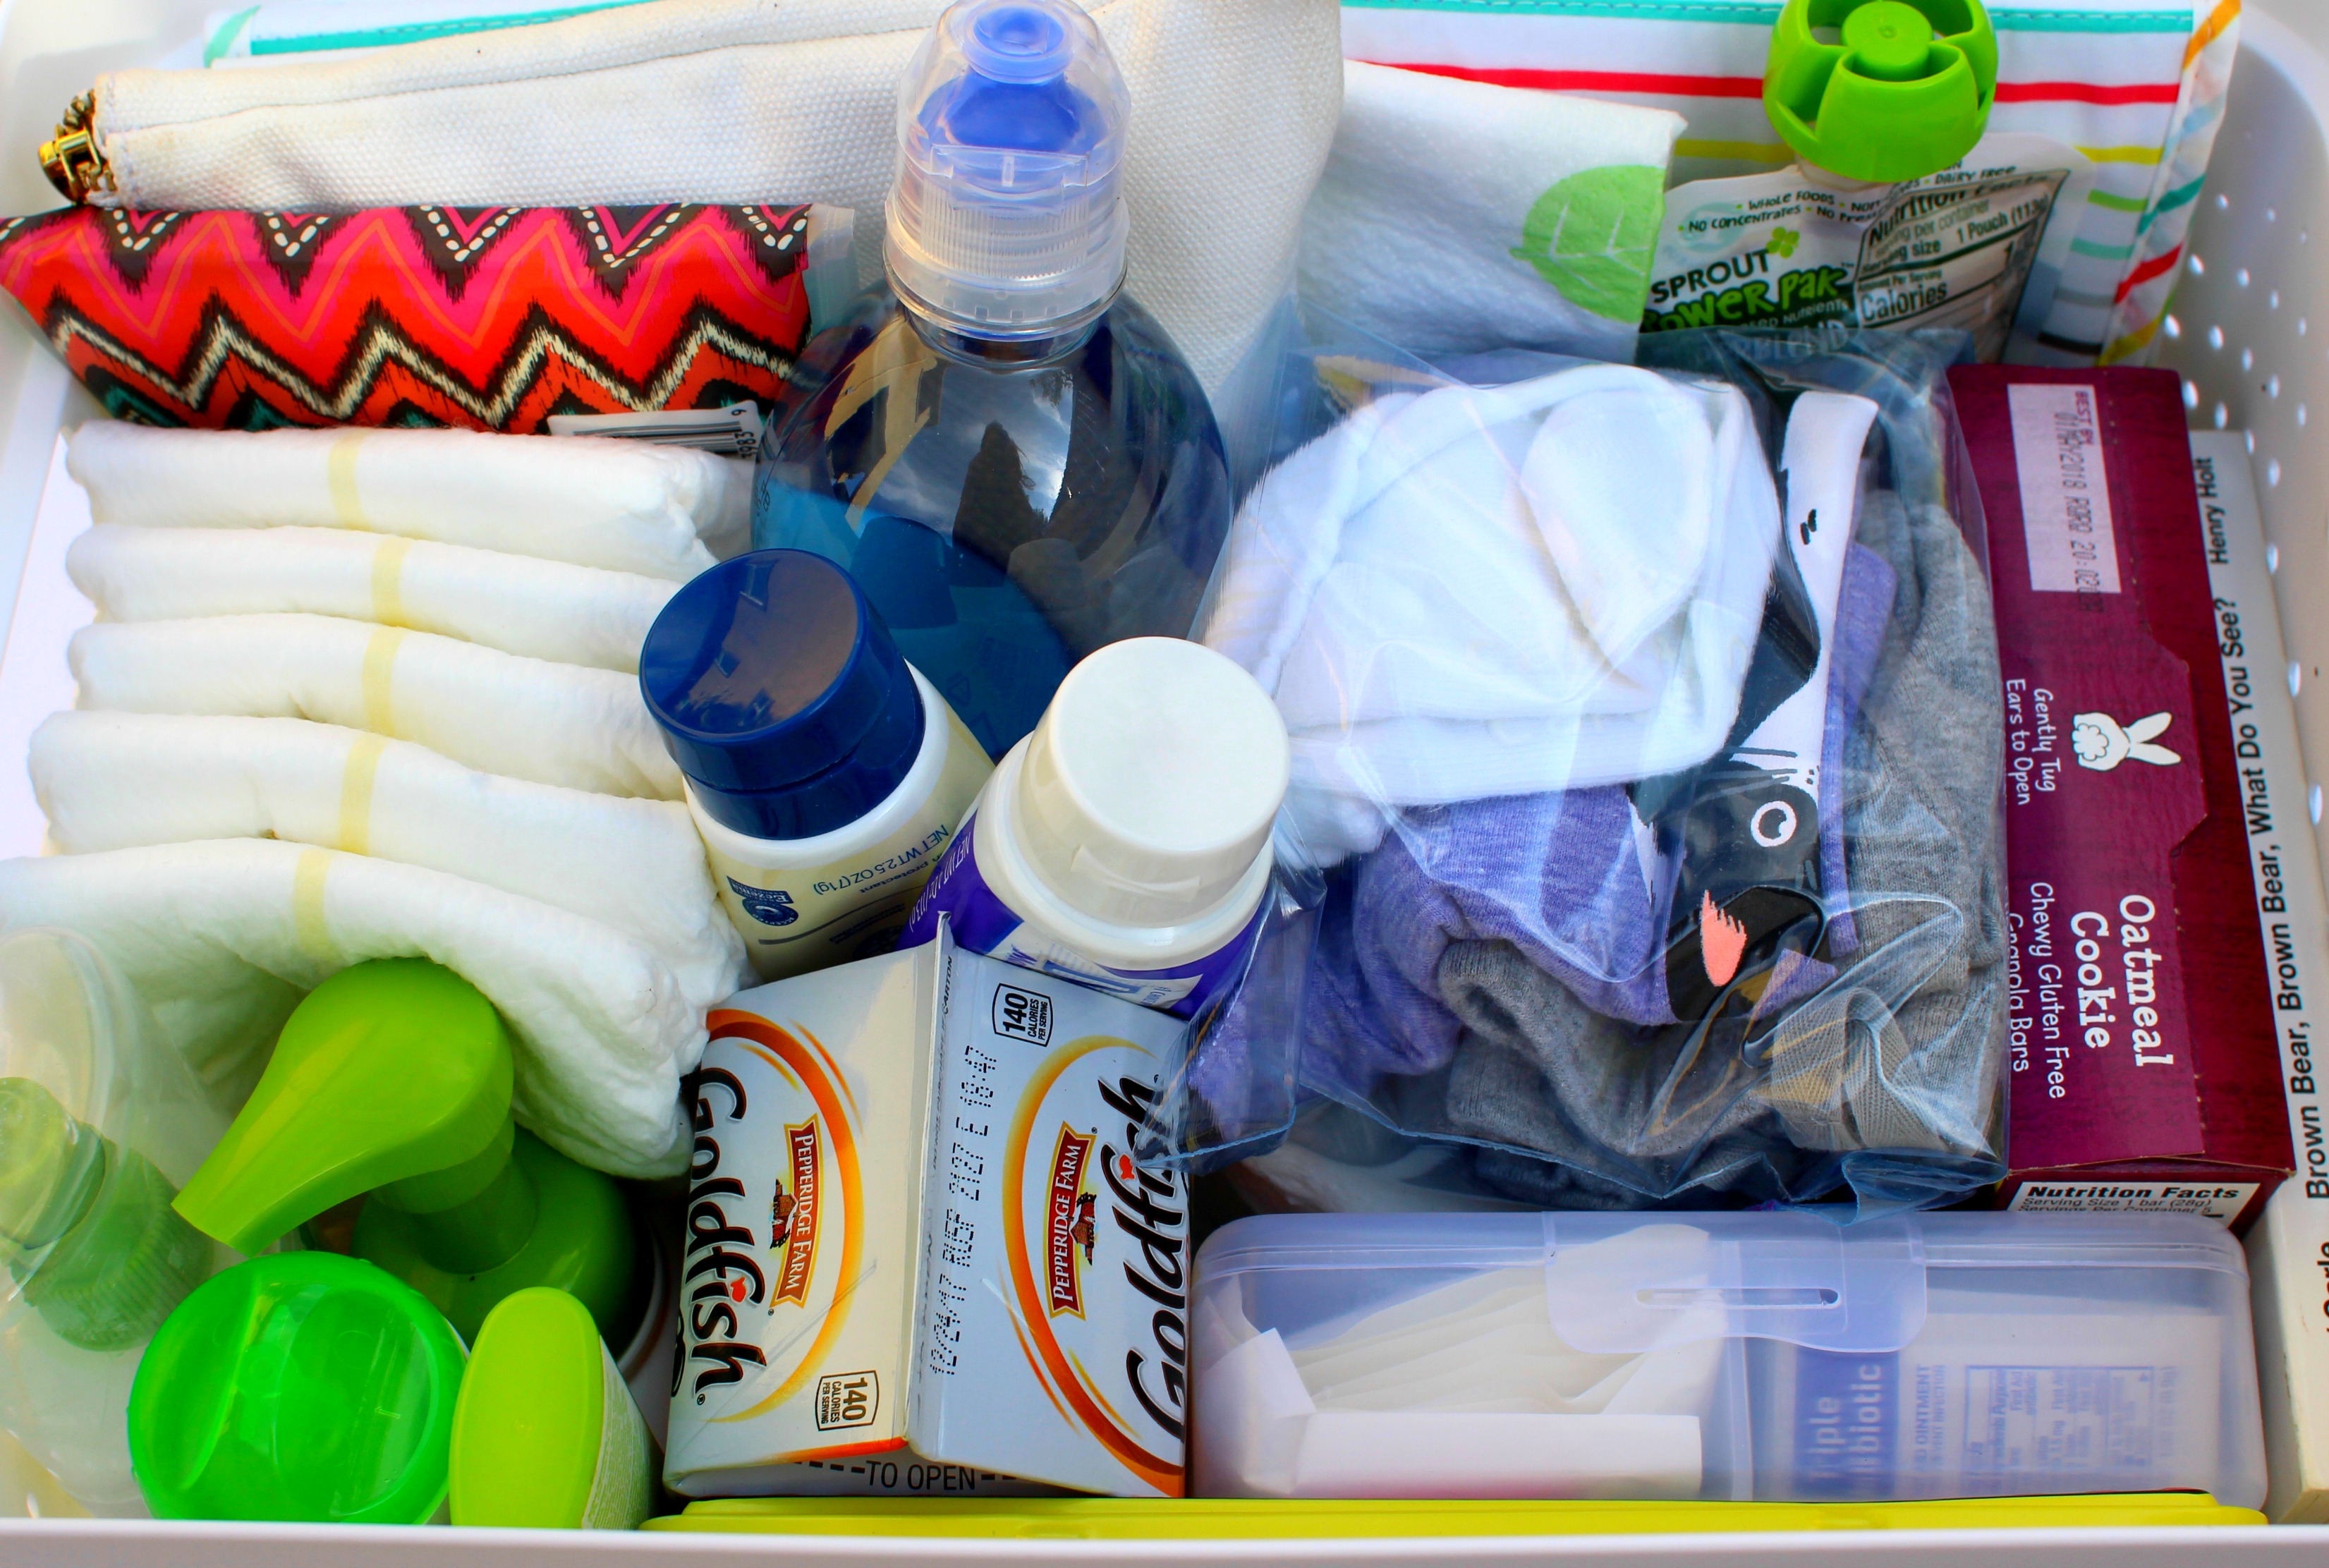 What to pack in an emergency car kit for a toddler. Be prepared for any emergency